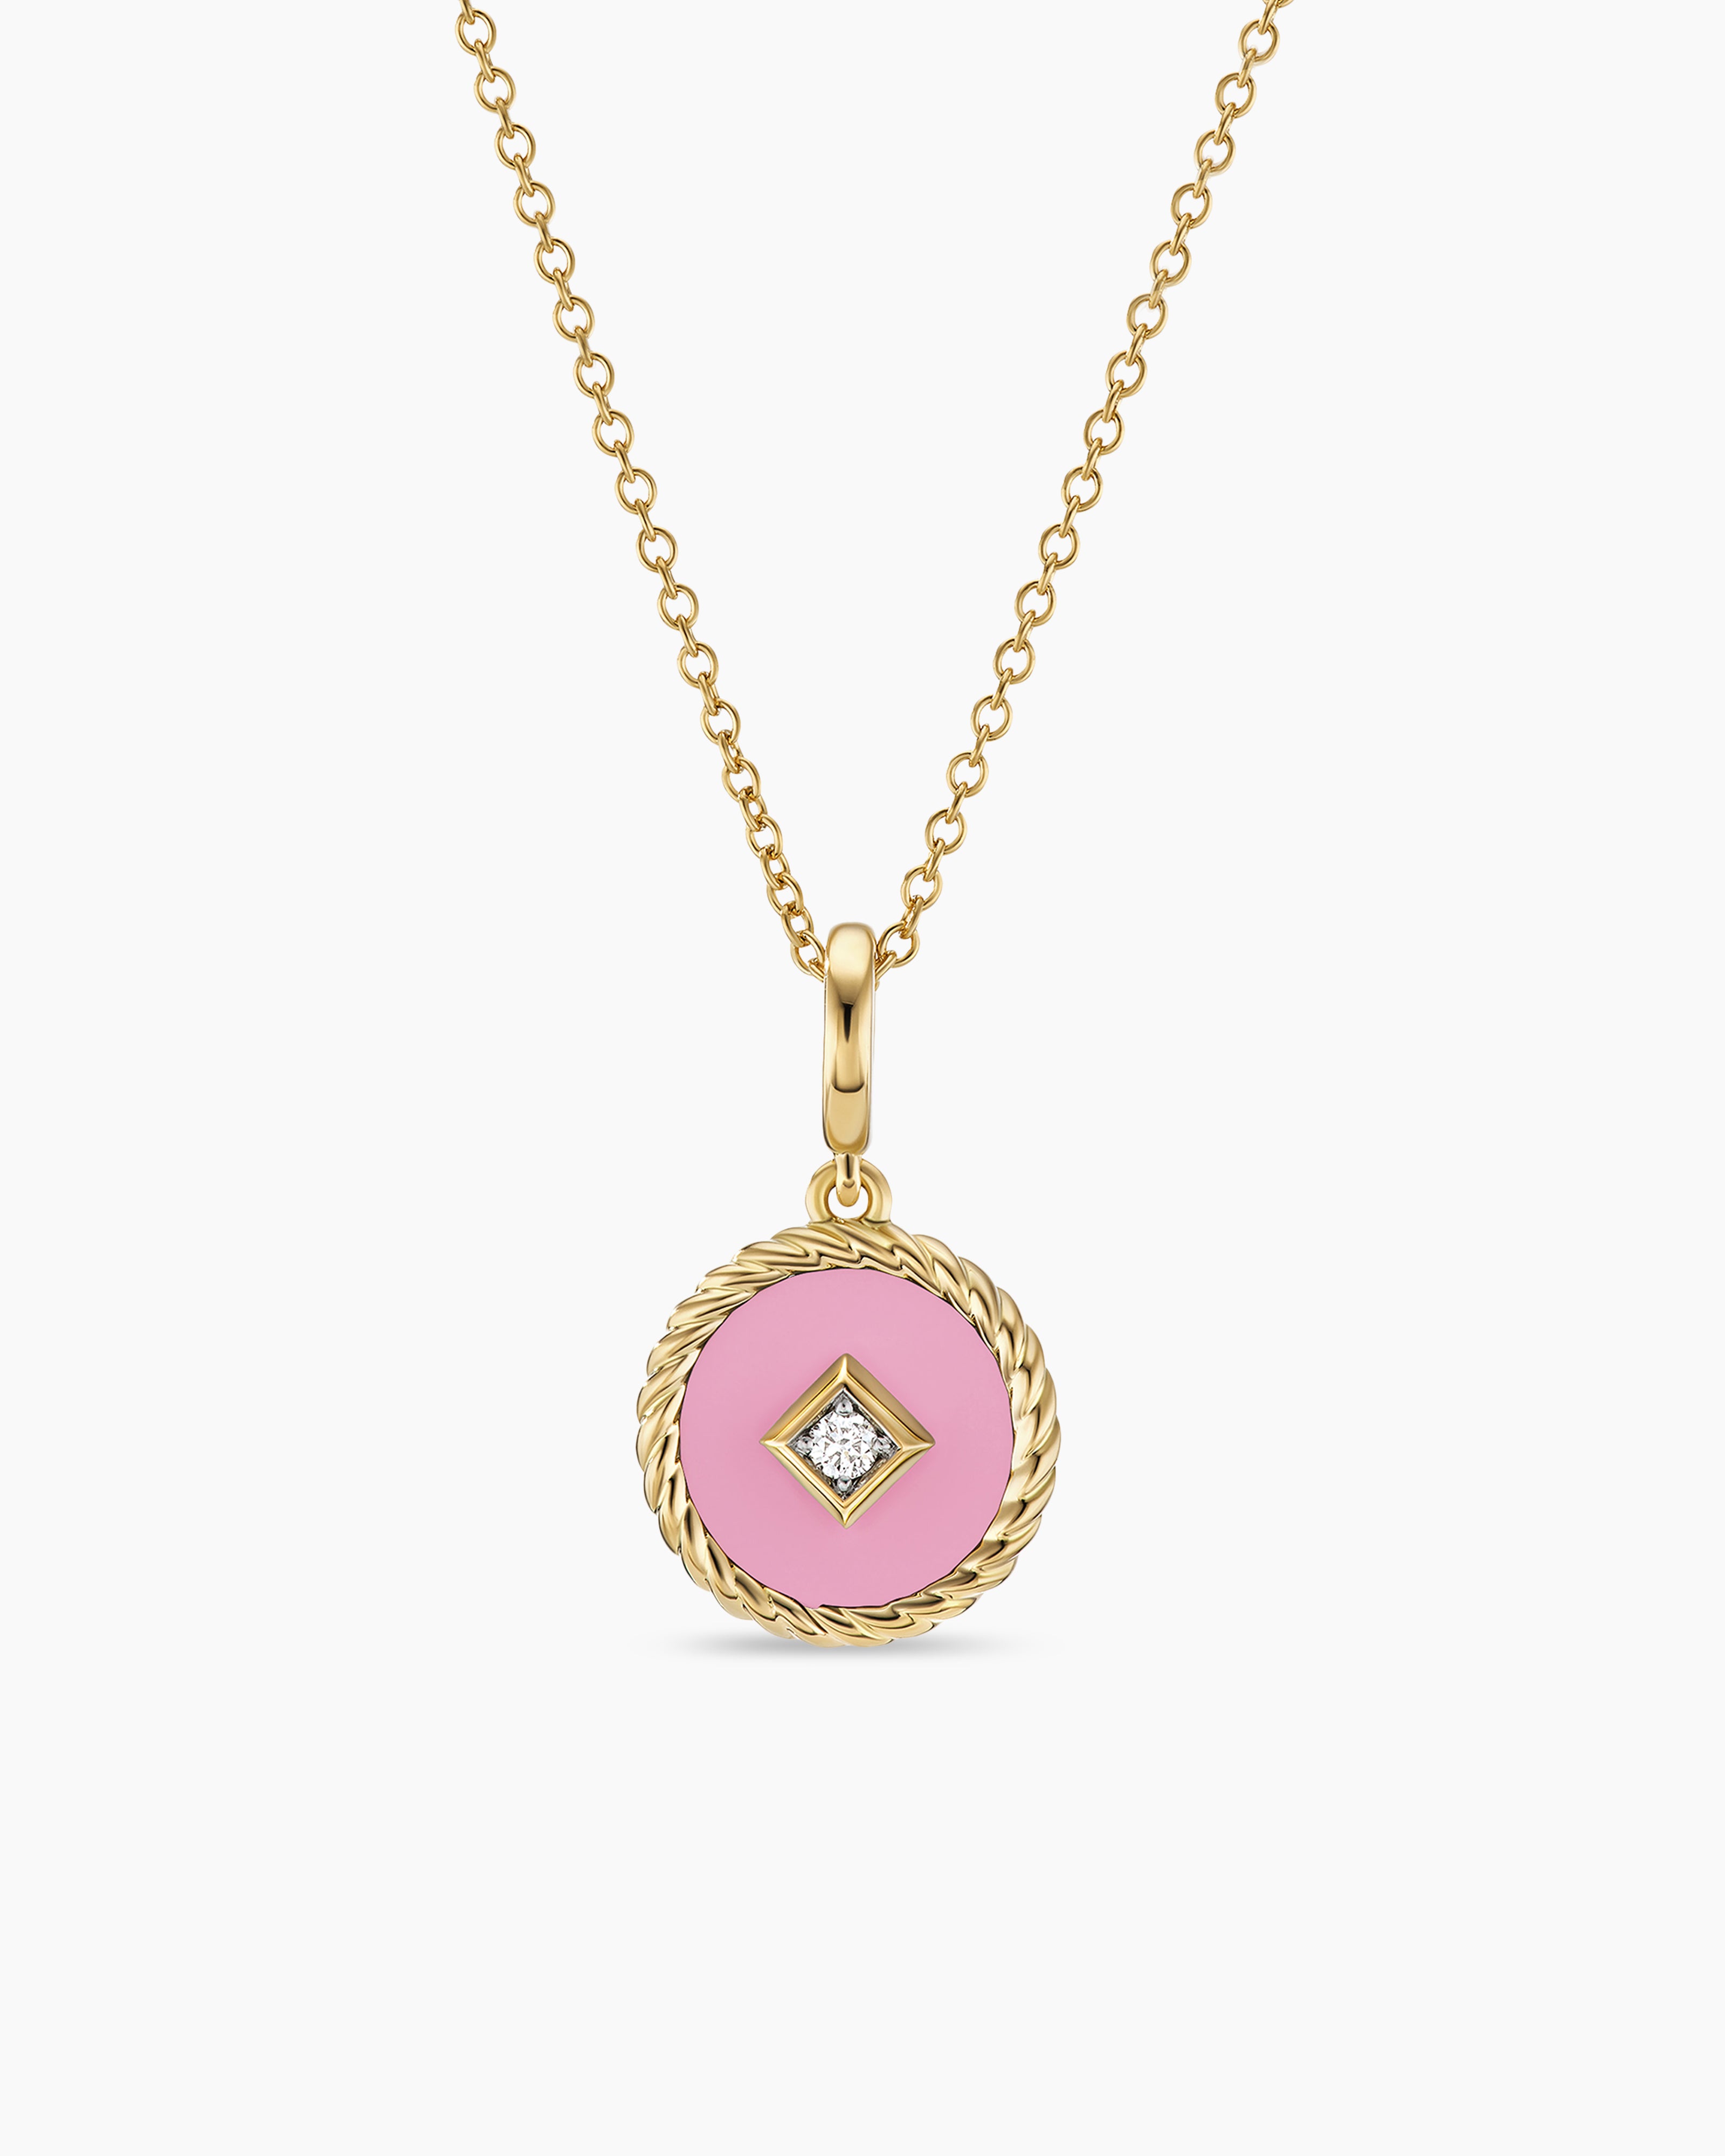 David Yurman Cable Collectibles Hot Pink Enamel Charm Necklace in 18K Yellow Gold with Center Diamond Women's Size 18 in